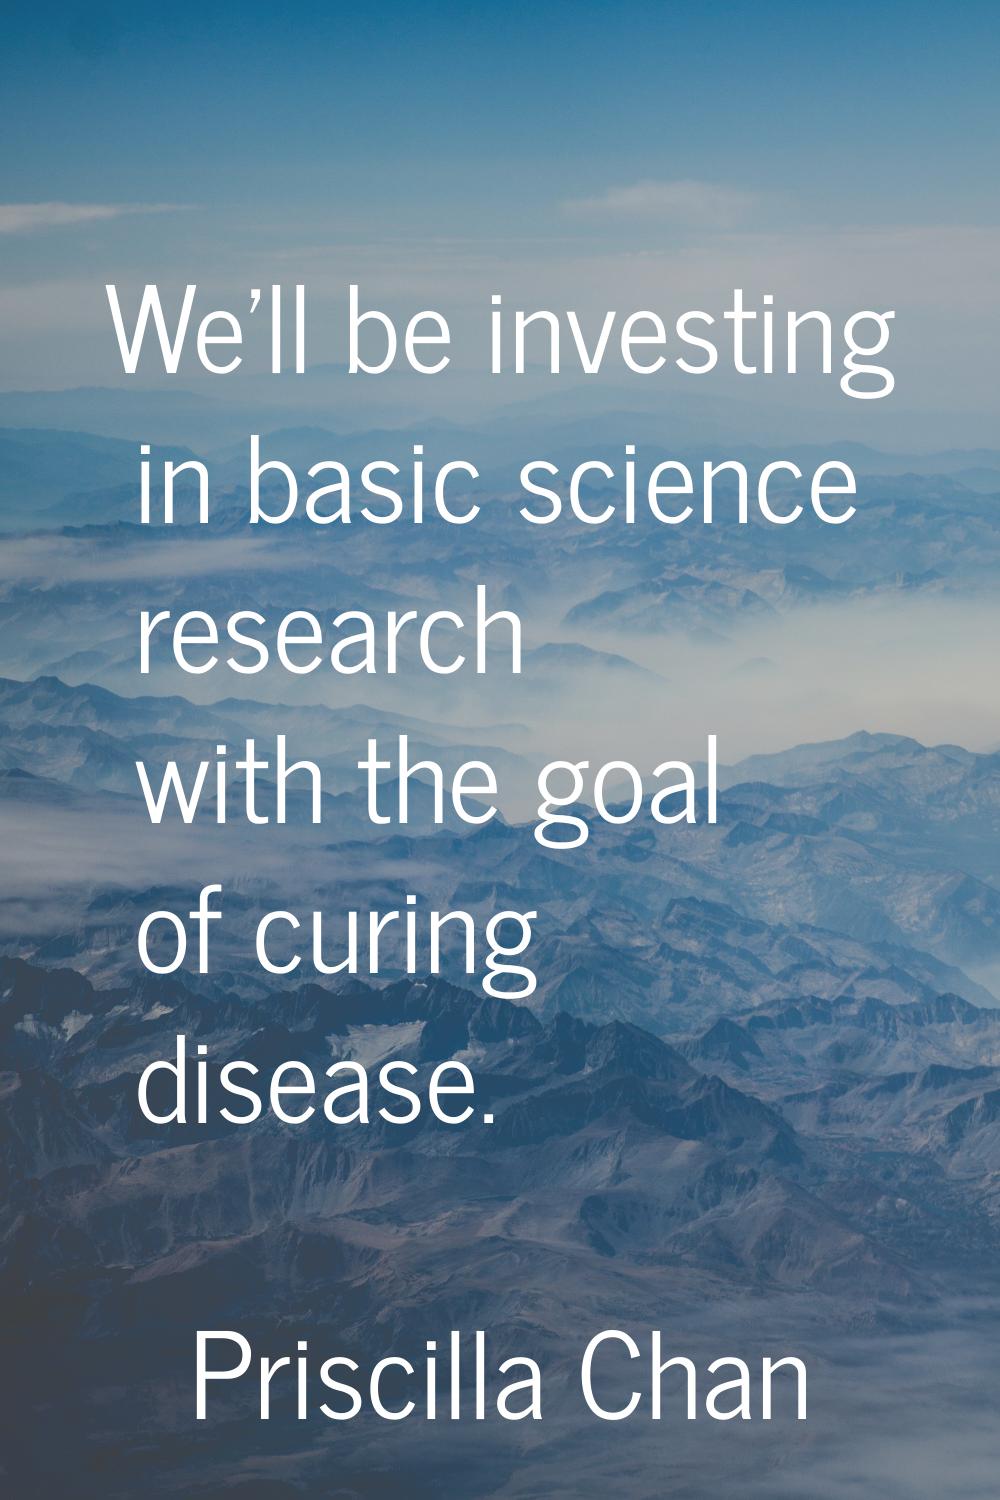 We'll be investing in basic science research with the goal of curing disease.